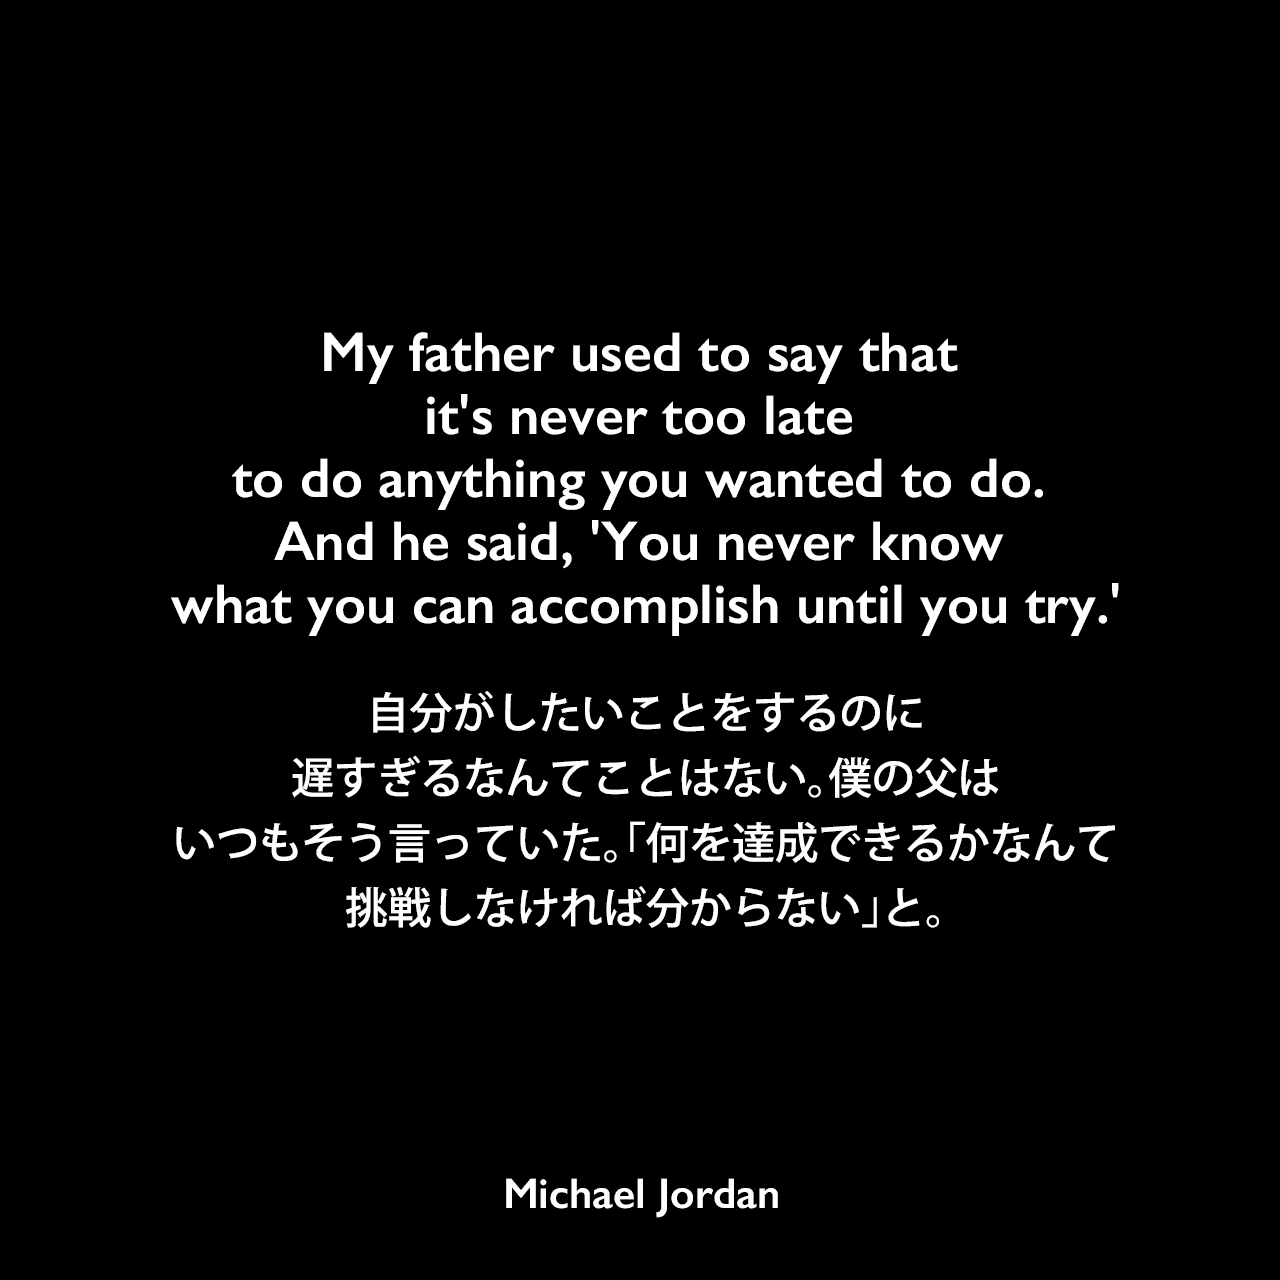 My father used to say that it’s never too late to do anything you wanted to do. And he said, ‘You never know what you can accomplish until you try.’自分がしたいことをするのに、遅すぎるなんてことはない。僕の父は、いつもそう言っていた。「何を達成できるかなんて、挑戦しなければ分からない」と。